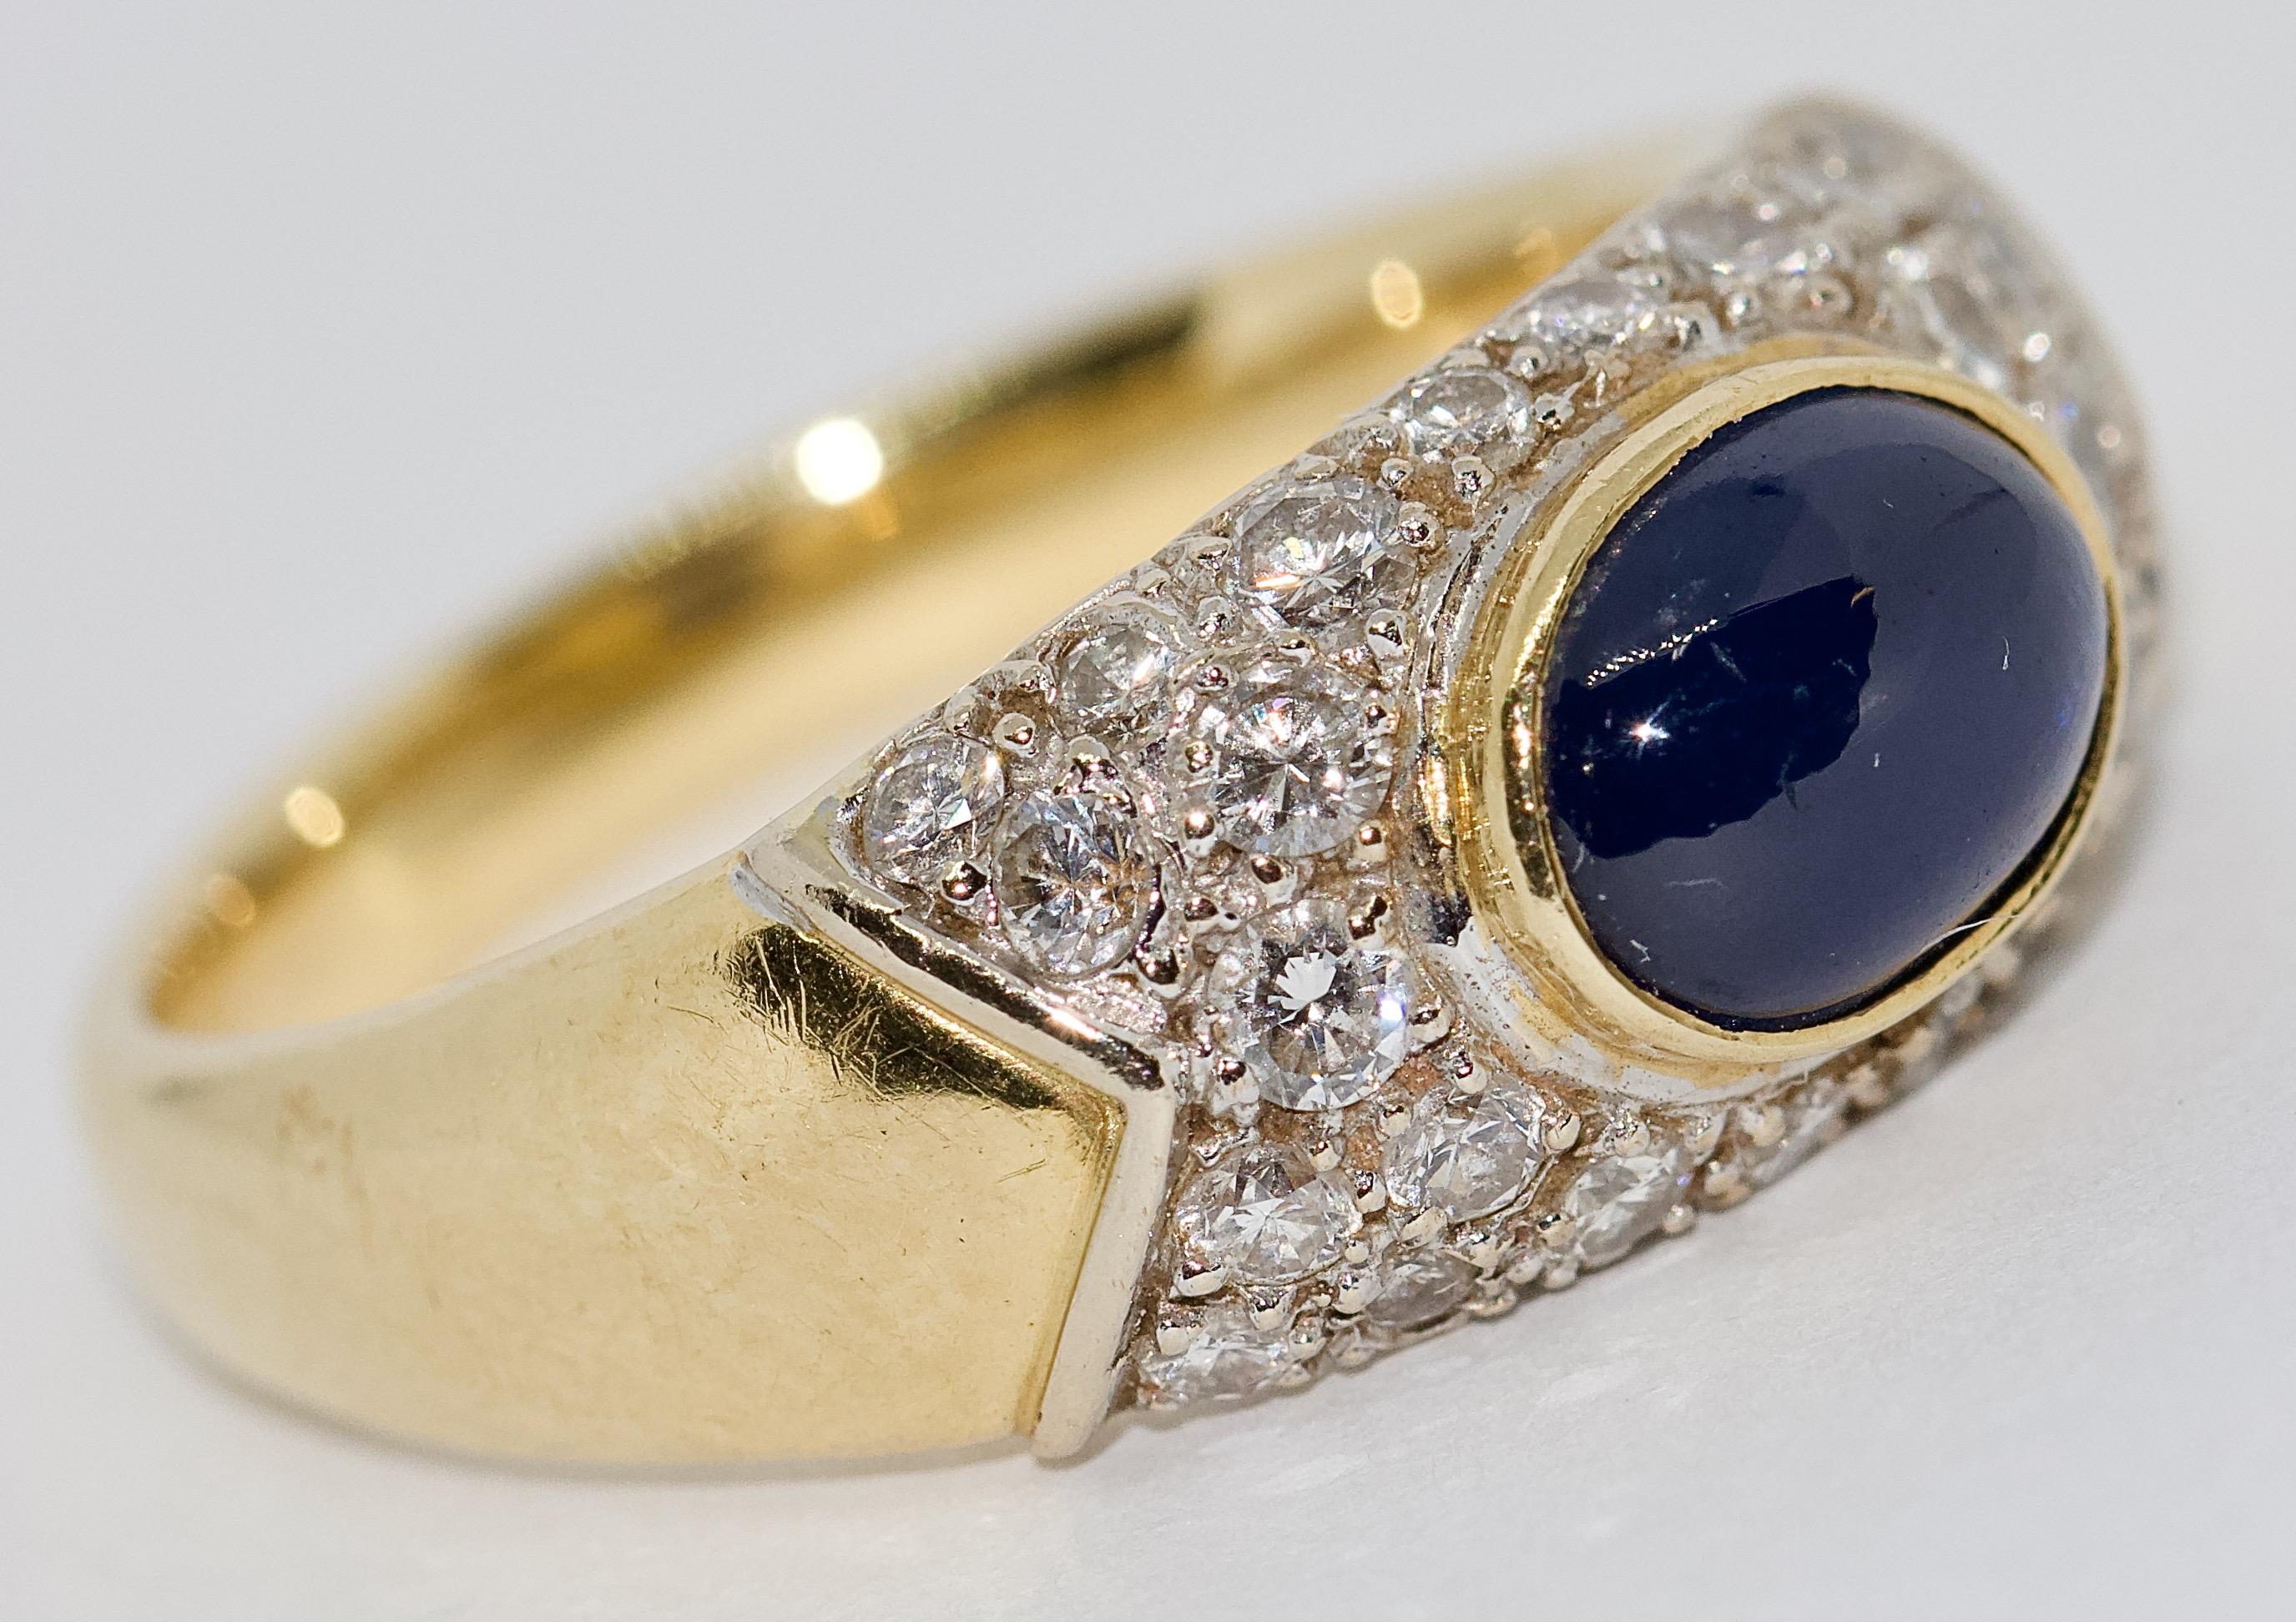 Modern Ladies Ring, 18 Karat Gold with 1.64 Carat Blue Sapphire and Diamonds For Sale